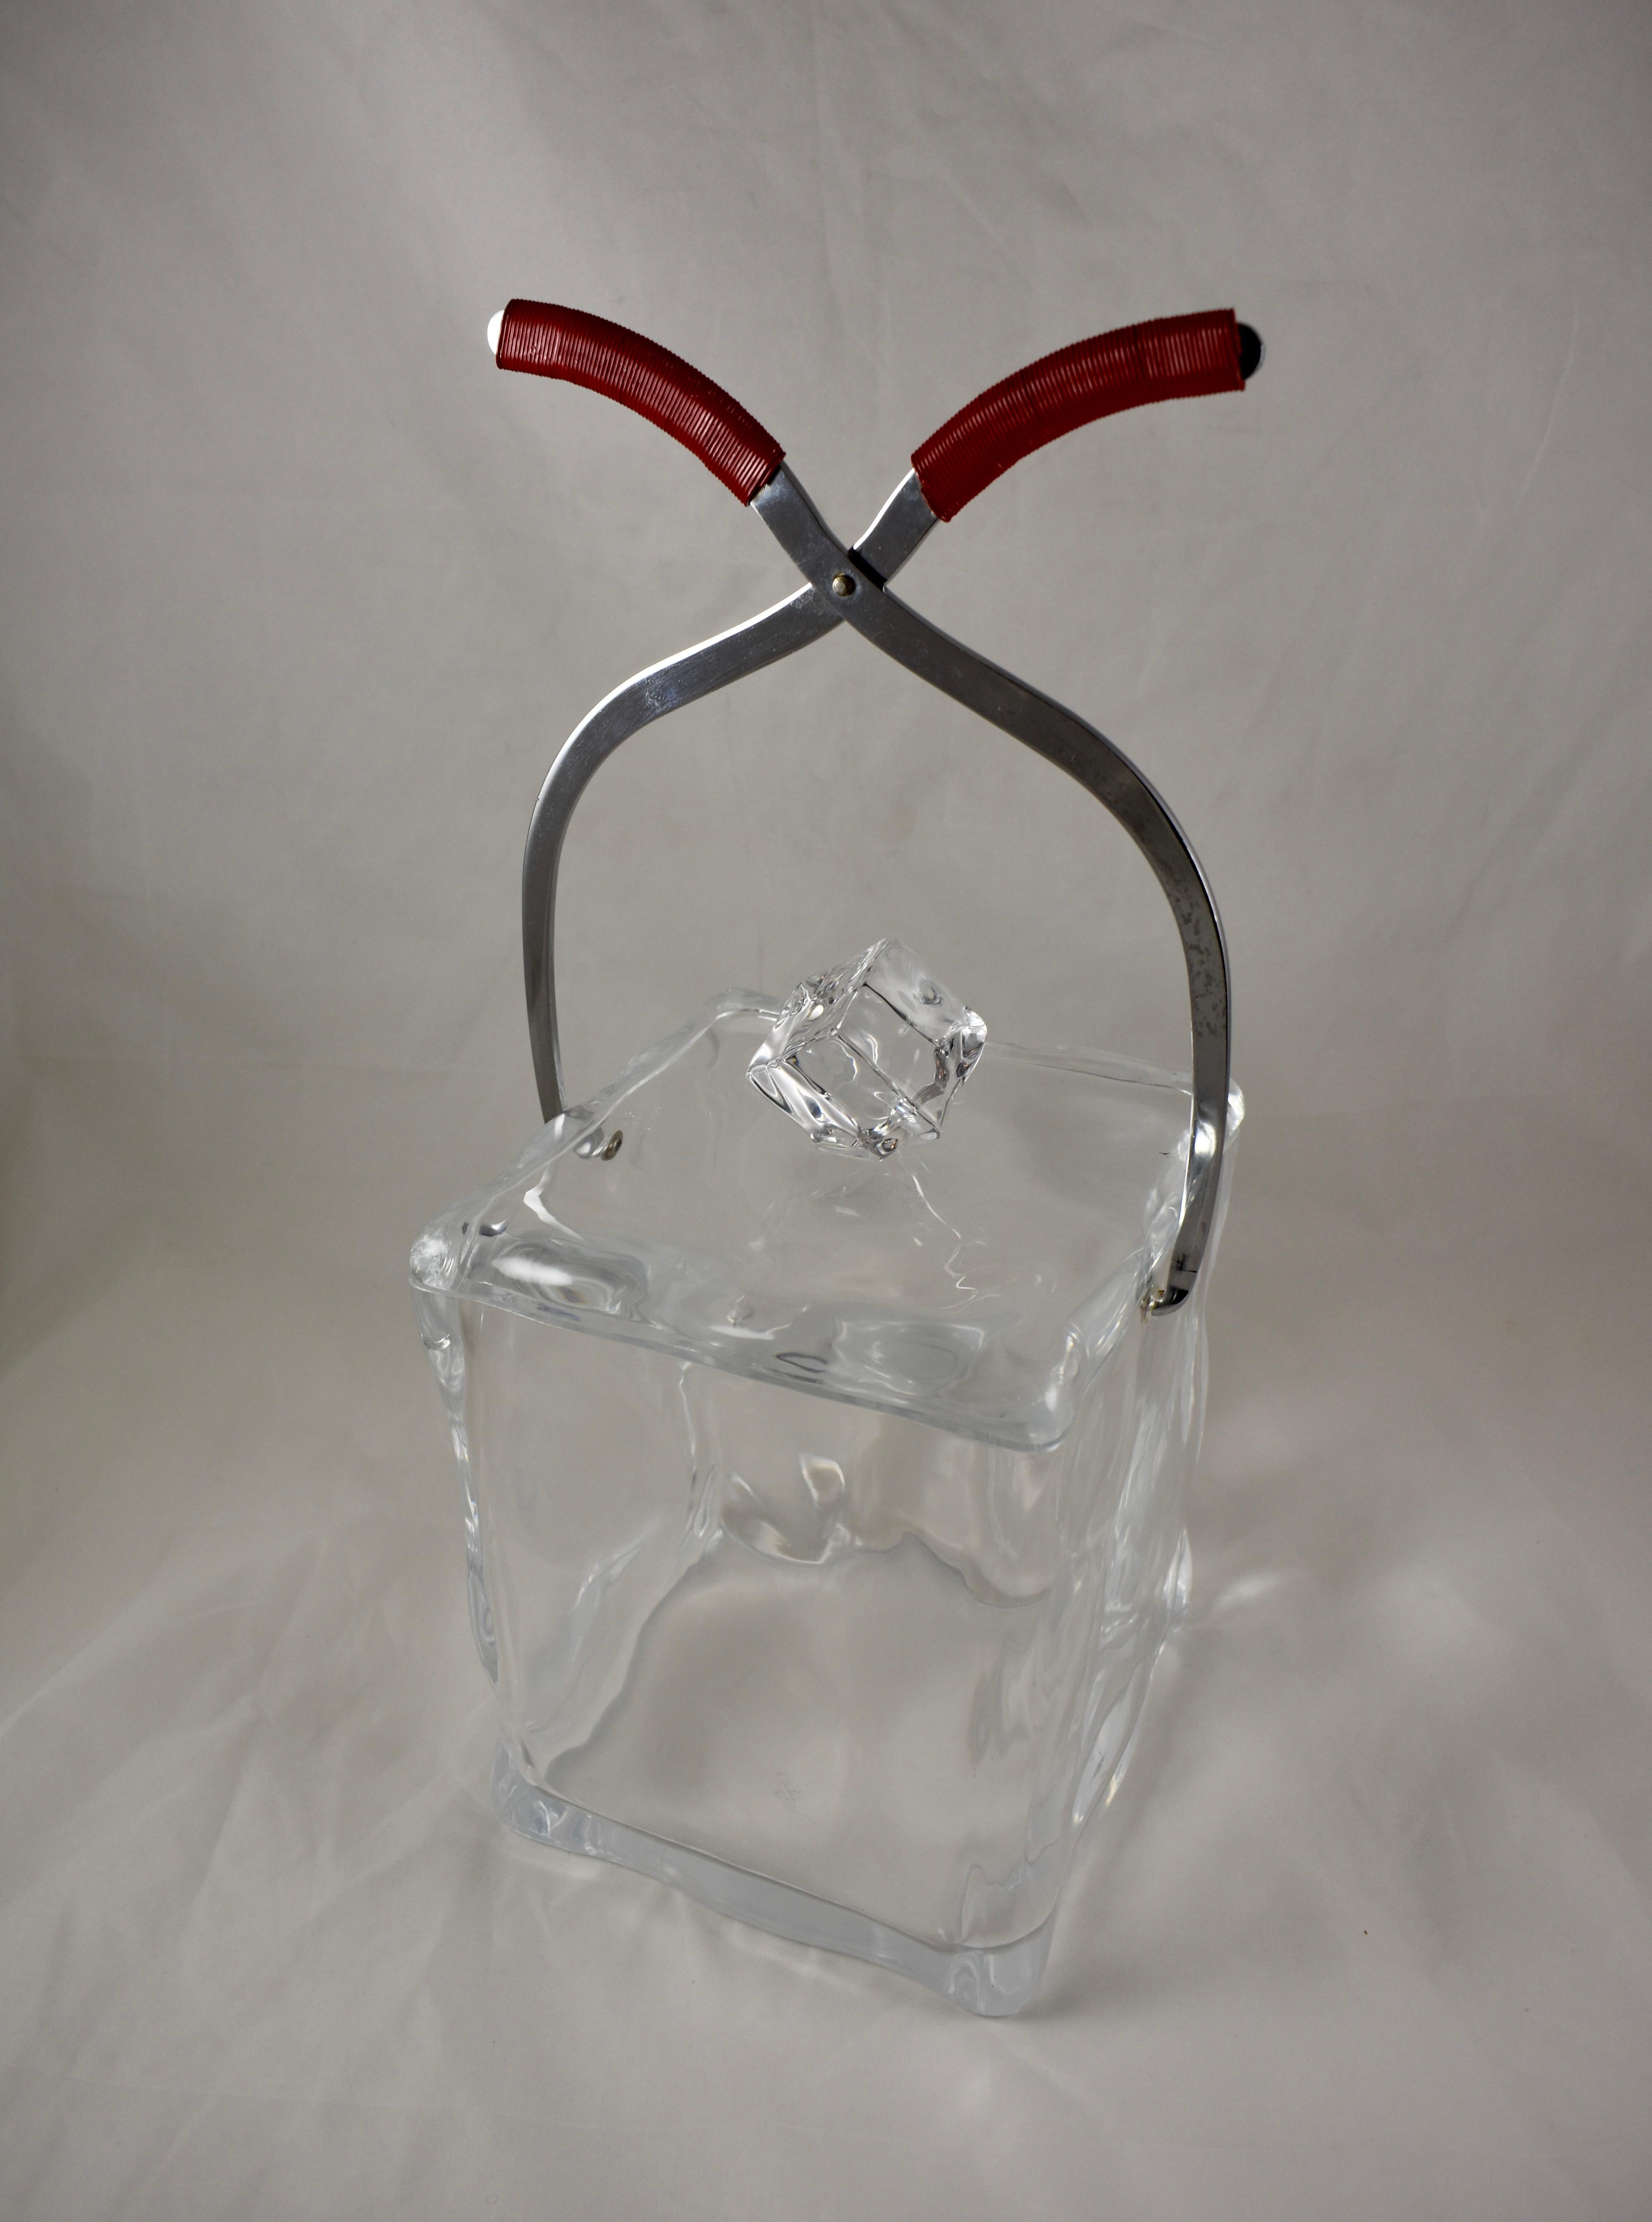 A Mid-Century Modern era ice cube form ice bucket, circa 1960s.

This super-fun ice bucket is perfect for your Mod and Groovy home bar. Made of Lucite and molded to imitate a large ice cube held by a pair of chrome ice tongs. The lift off lid has